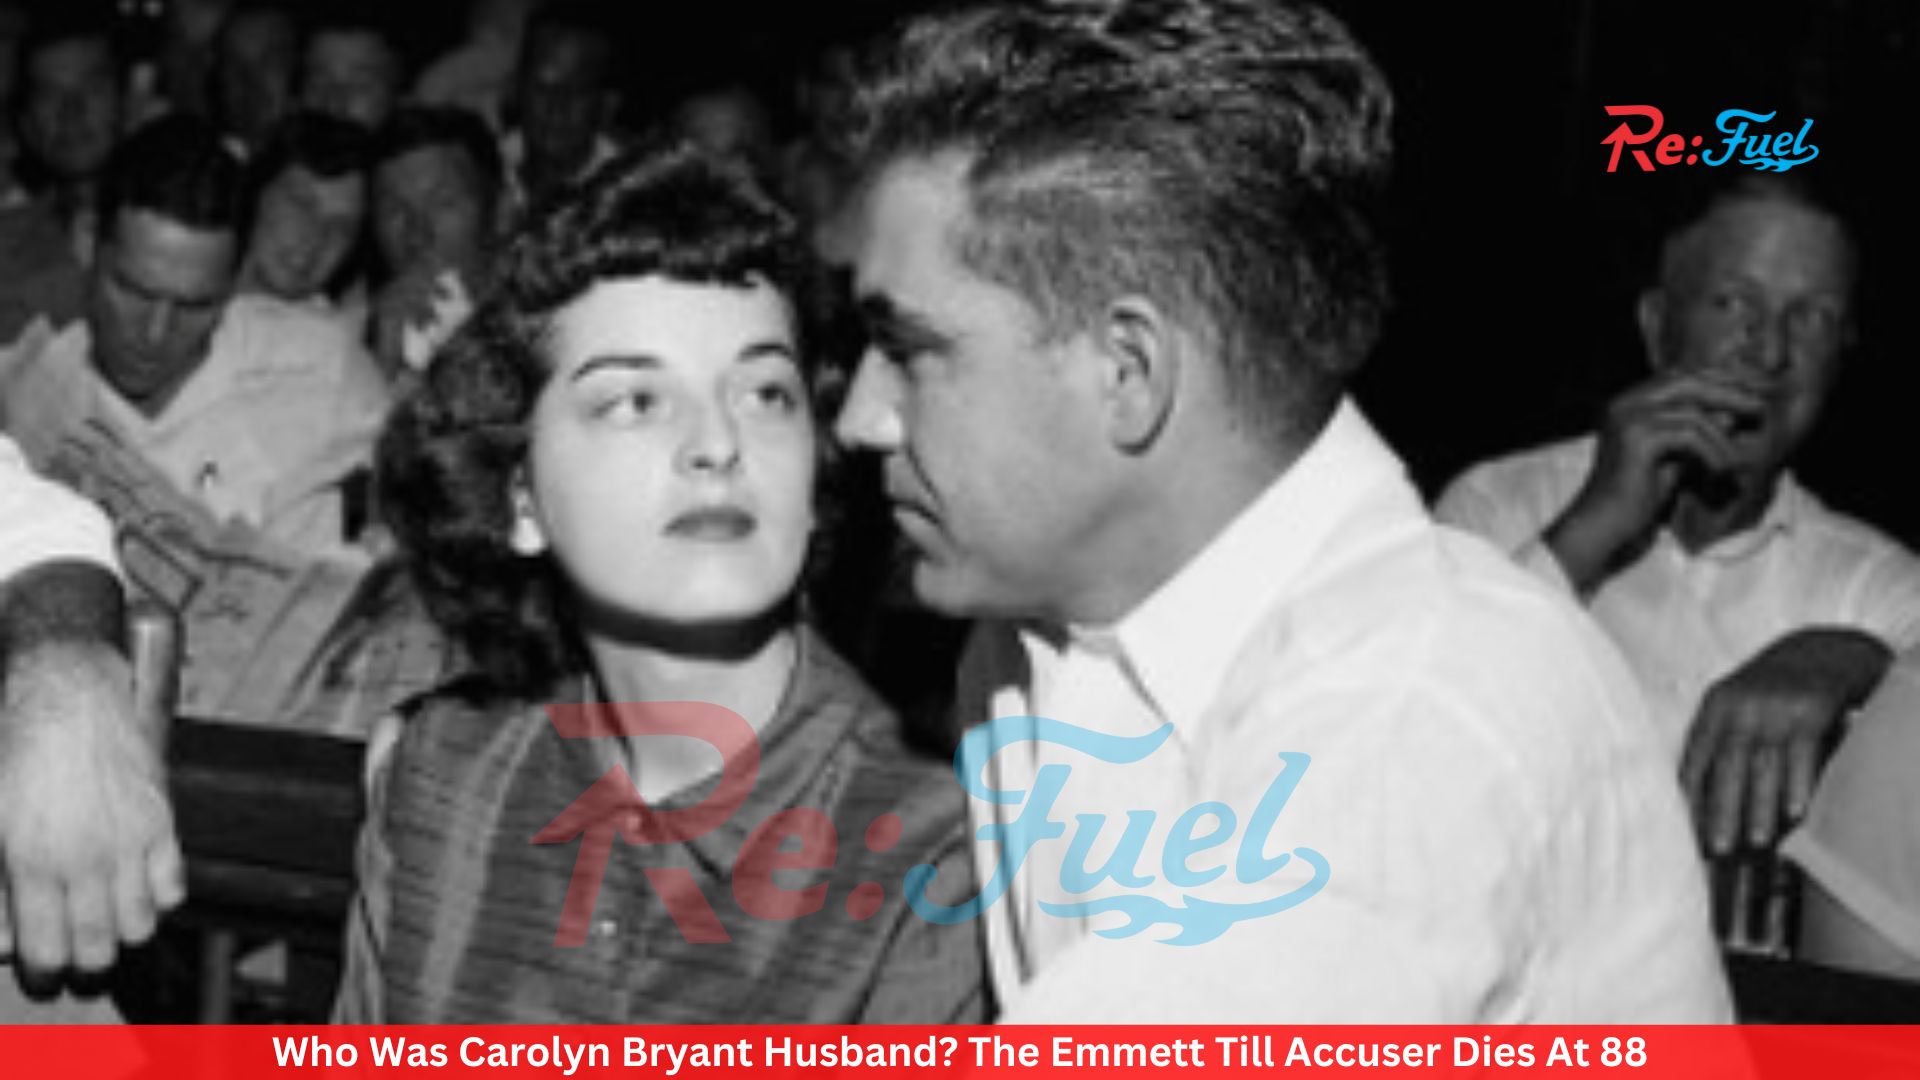 Who Was Carolyn Bryant Husband? The Emmett Till Accuser Dies At 88